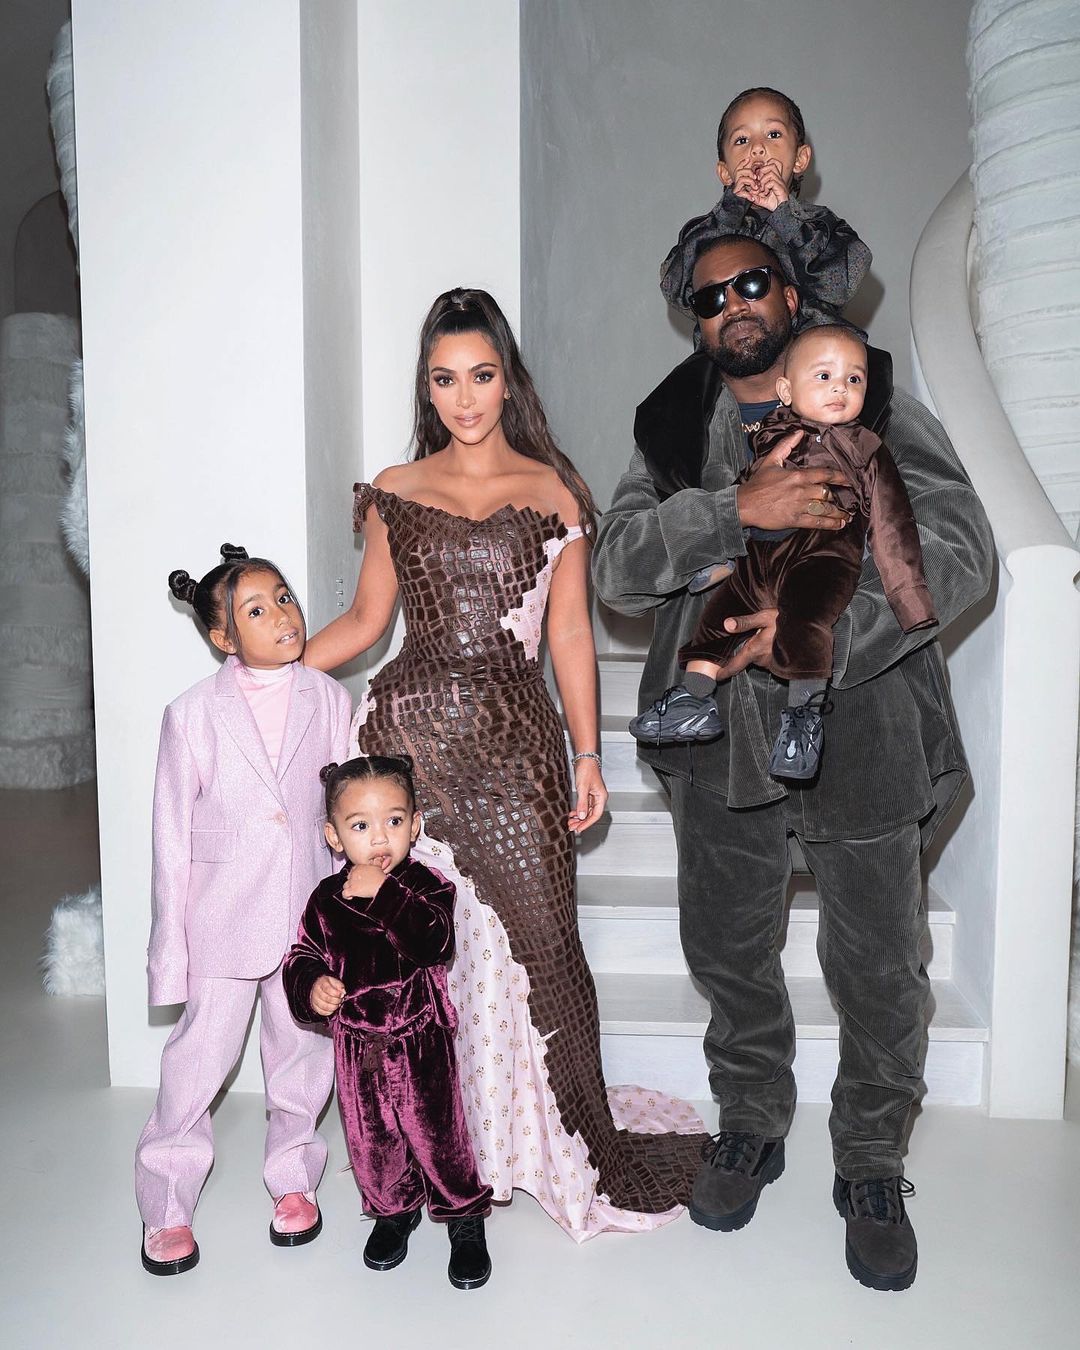 Prior to his new marriage, Kanye was married to Kim Kardashian, with whom he shares four children